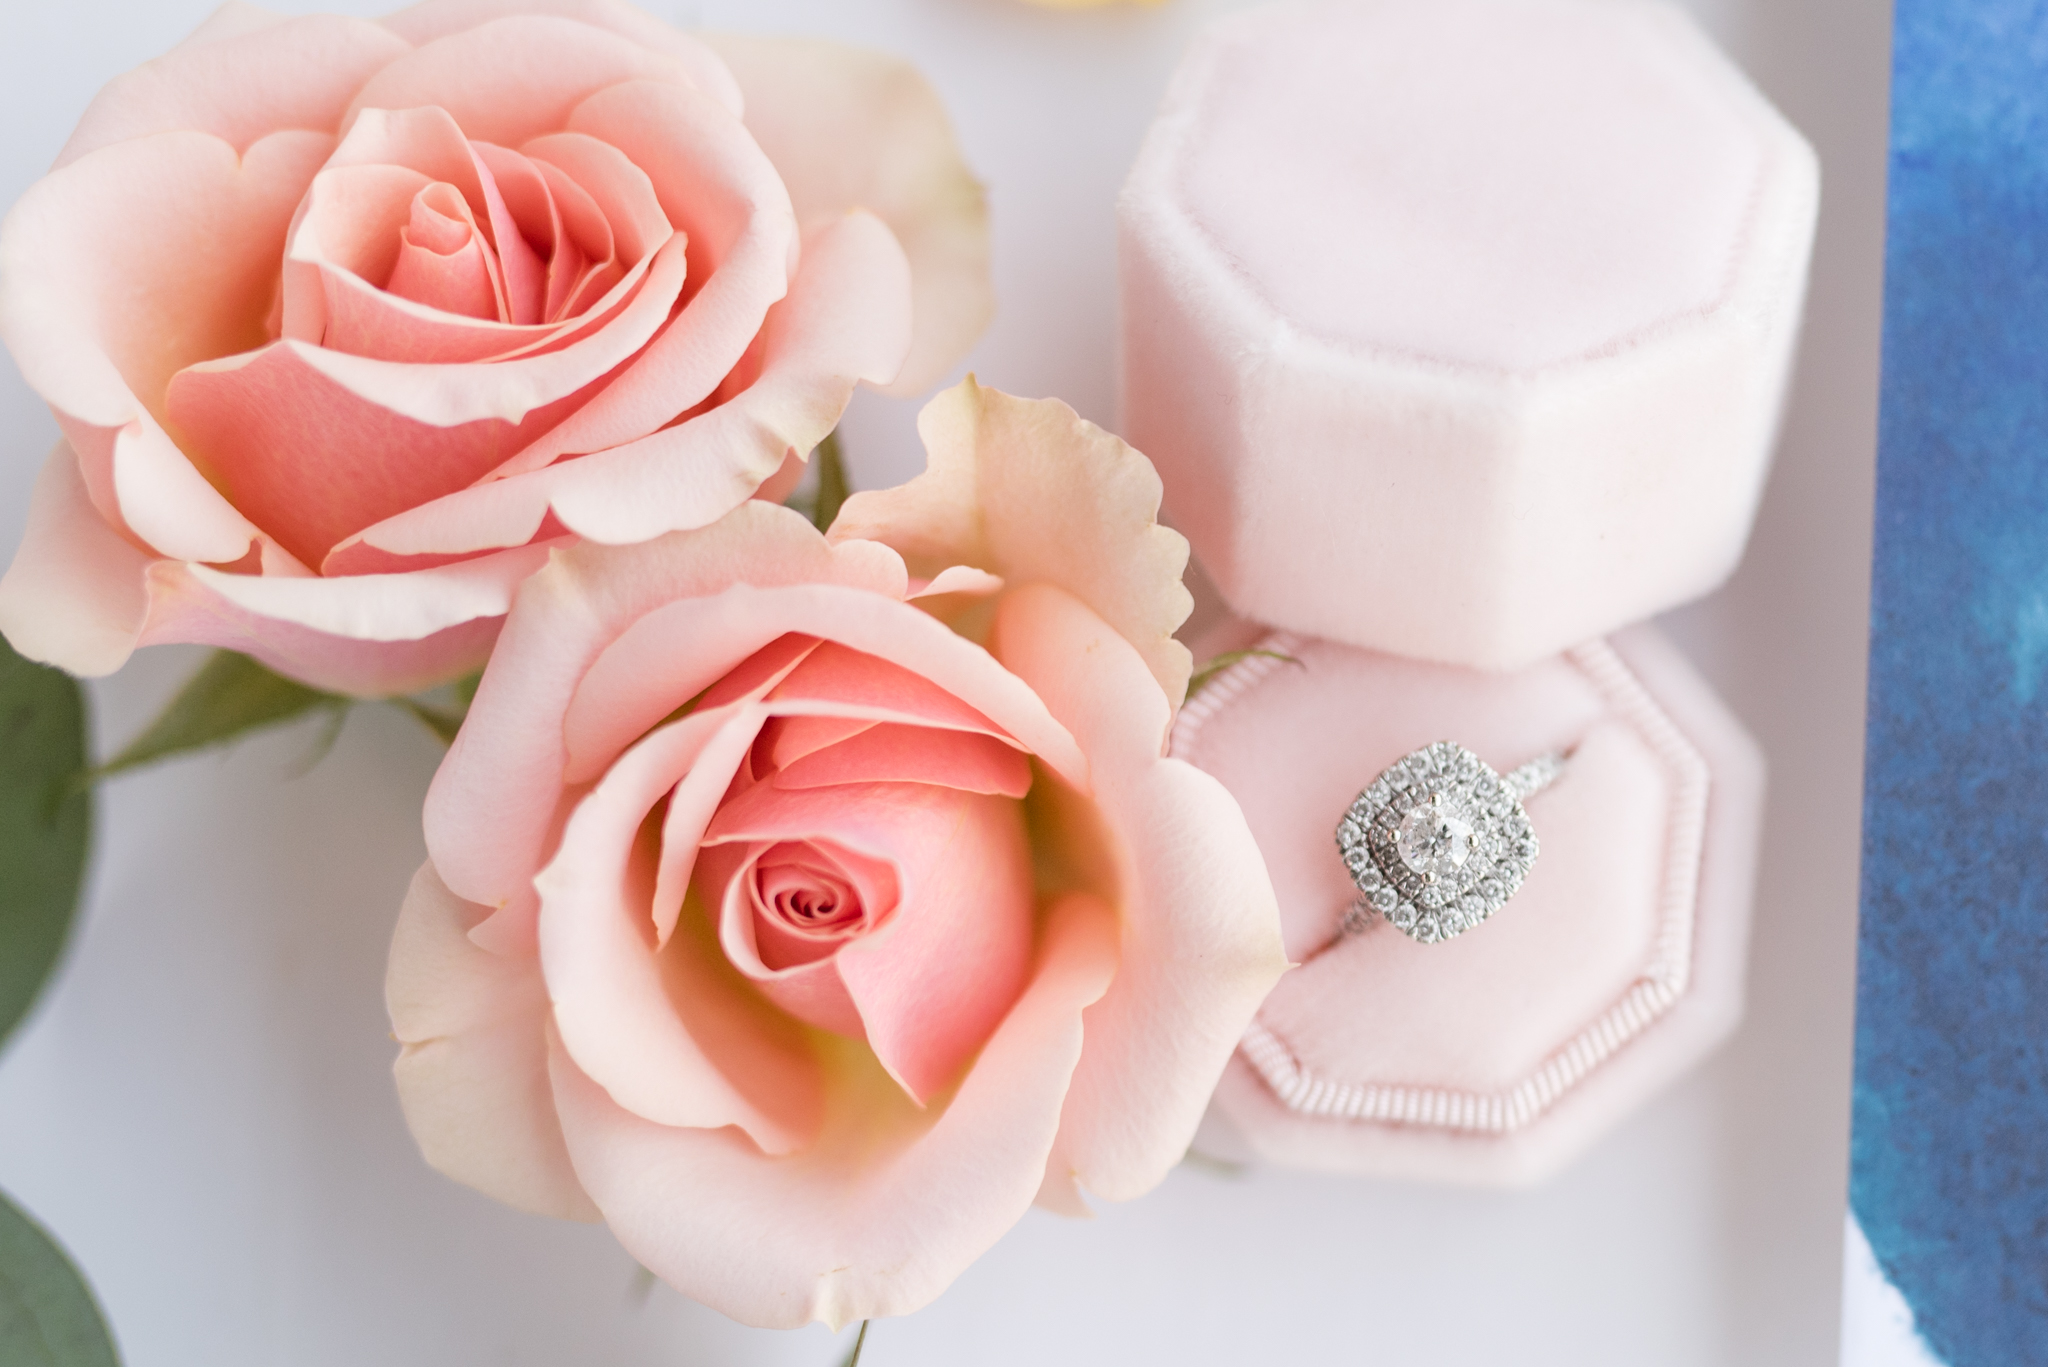 Wedding ring sits with garden roses.